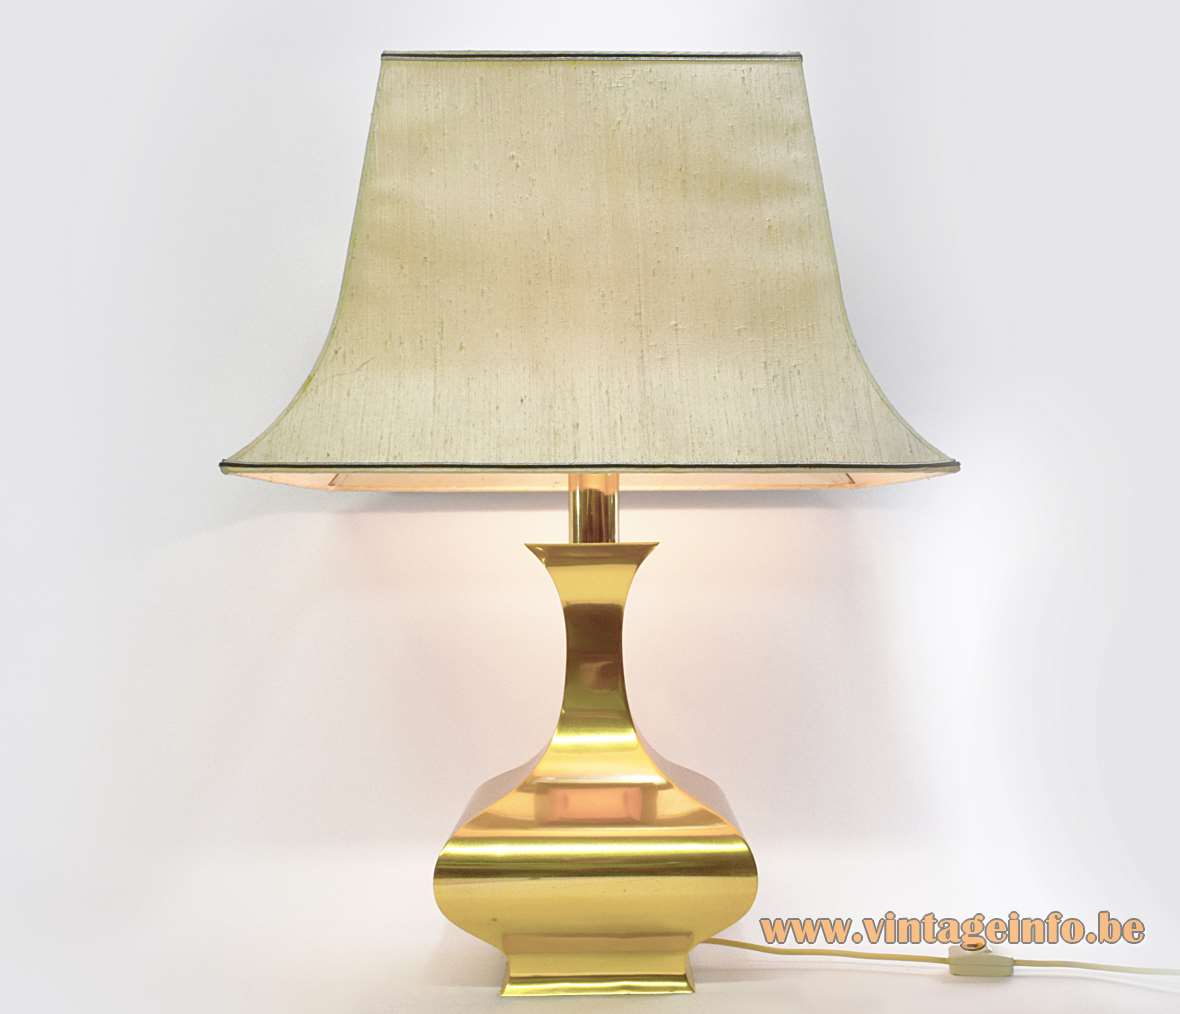 Maria Pergay Balustre table lamp square brass base concave neck fabric pagoda lampshade 1970s design France